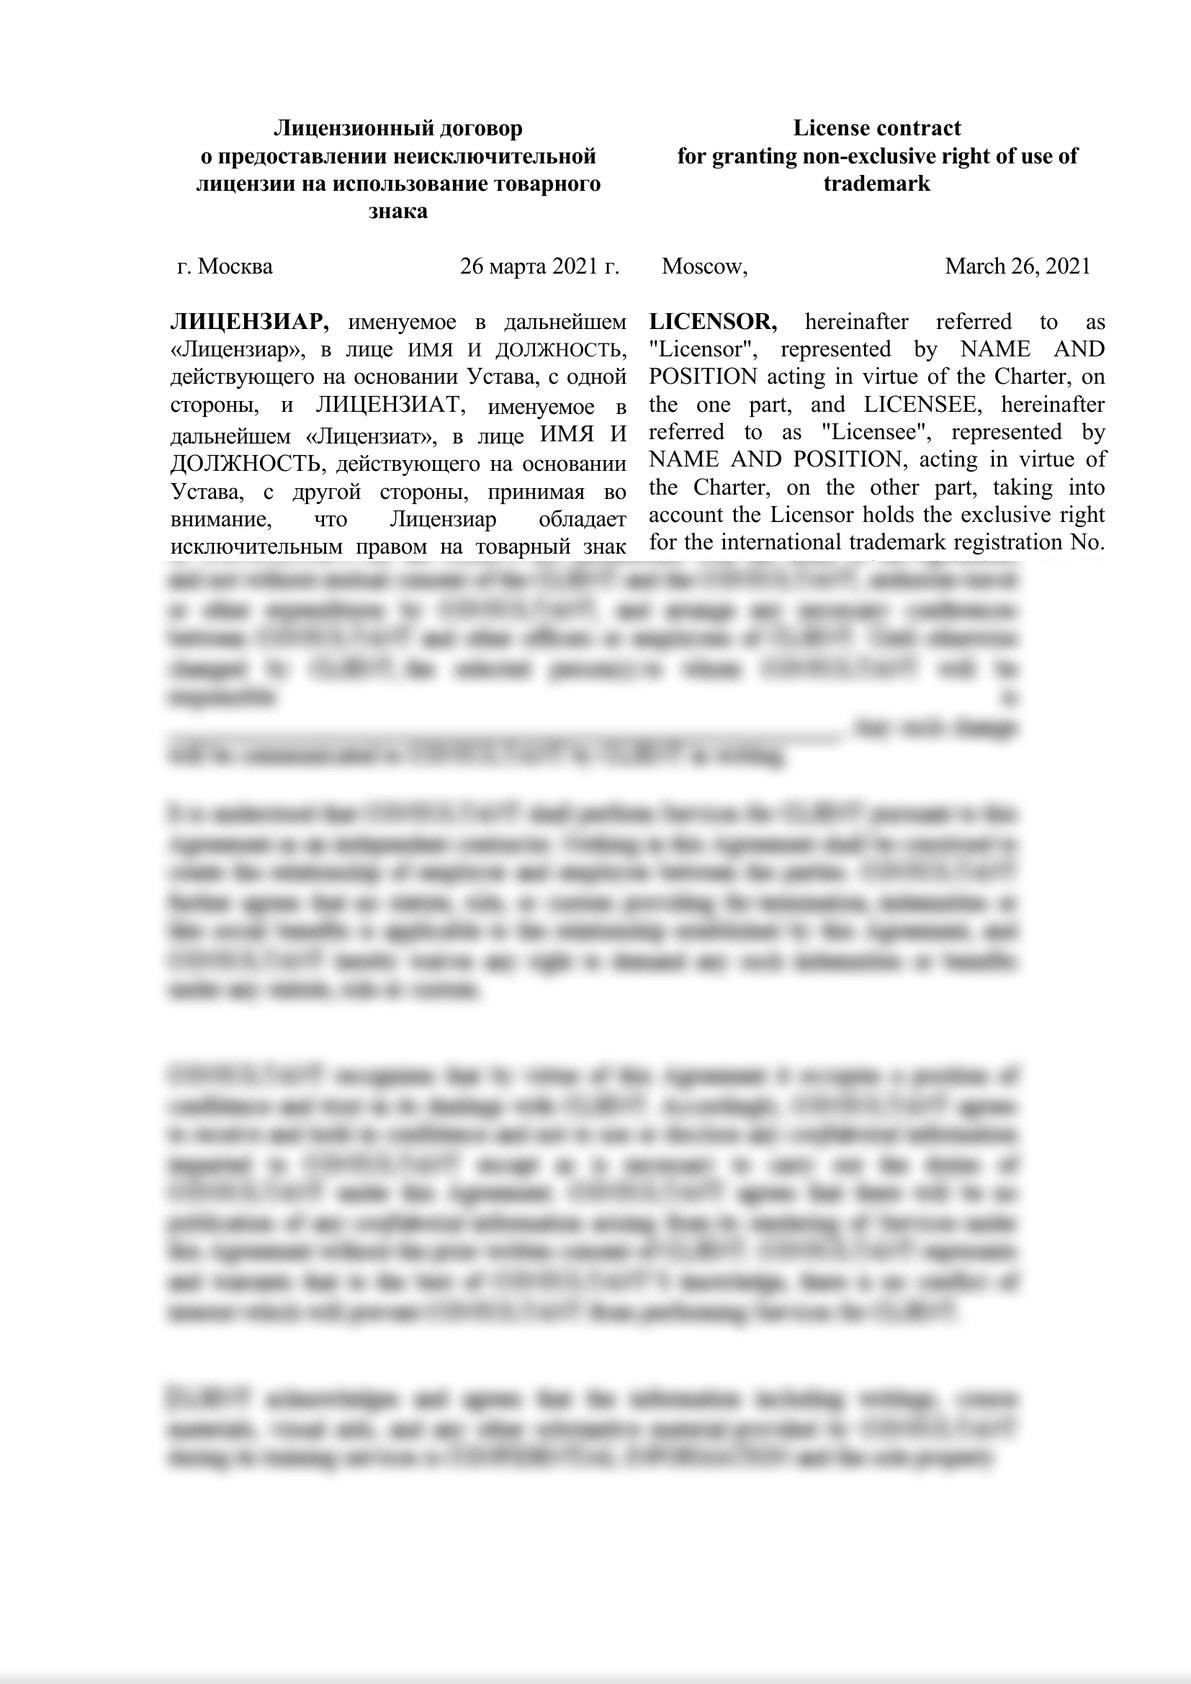 Russian License contract for granting non-exclusive right of use of trademark-0